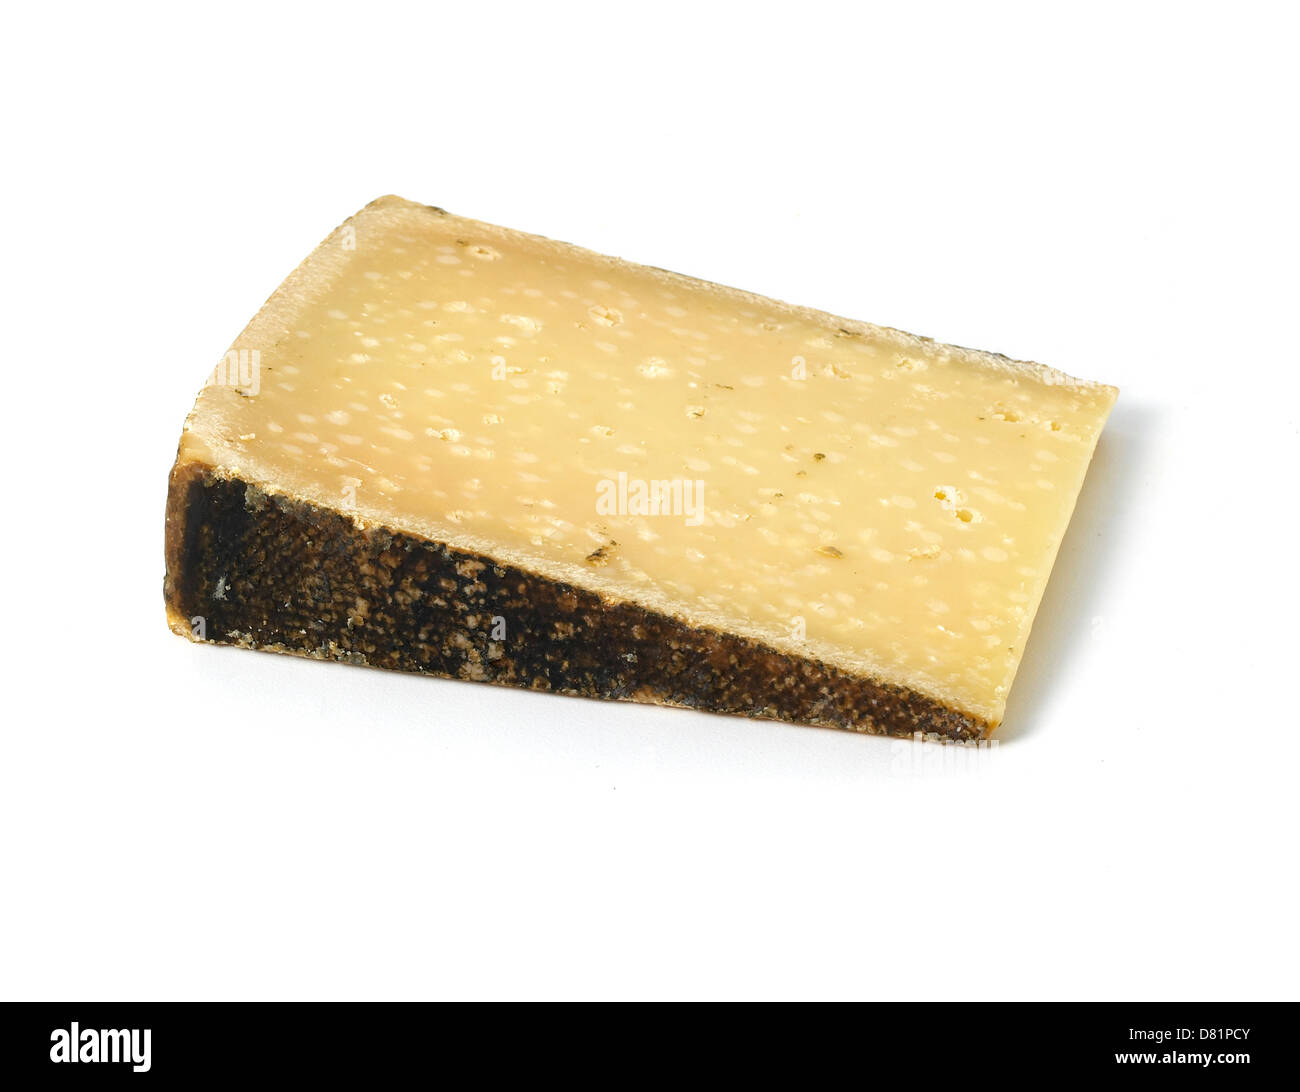 wedge of cheese cut out against a white background Stock Photo